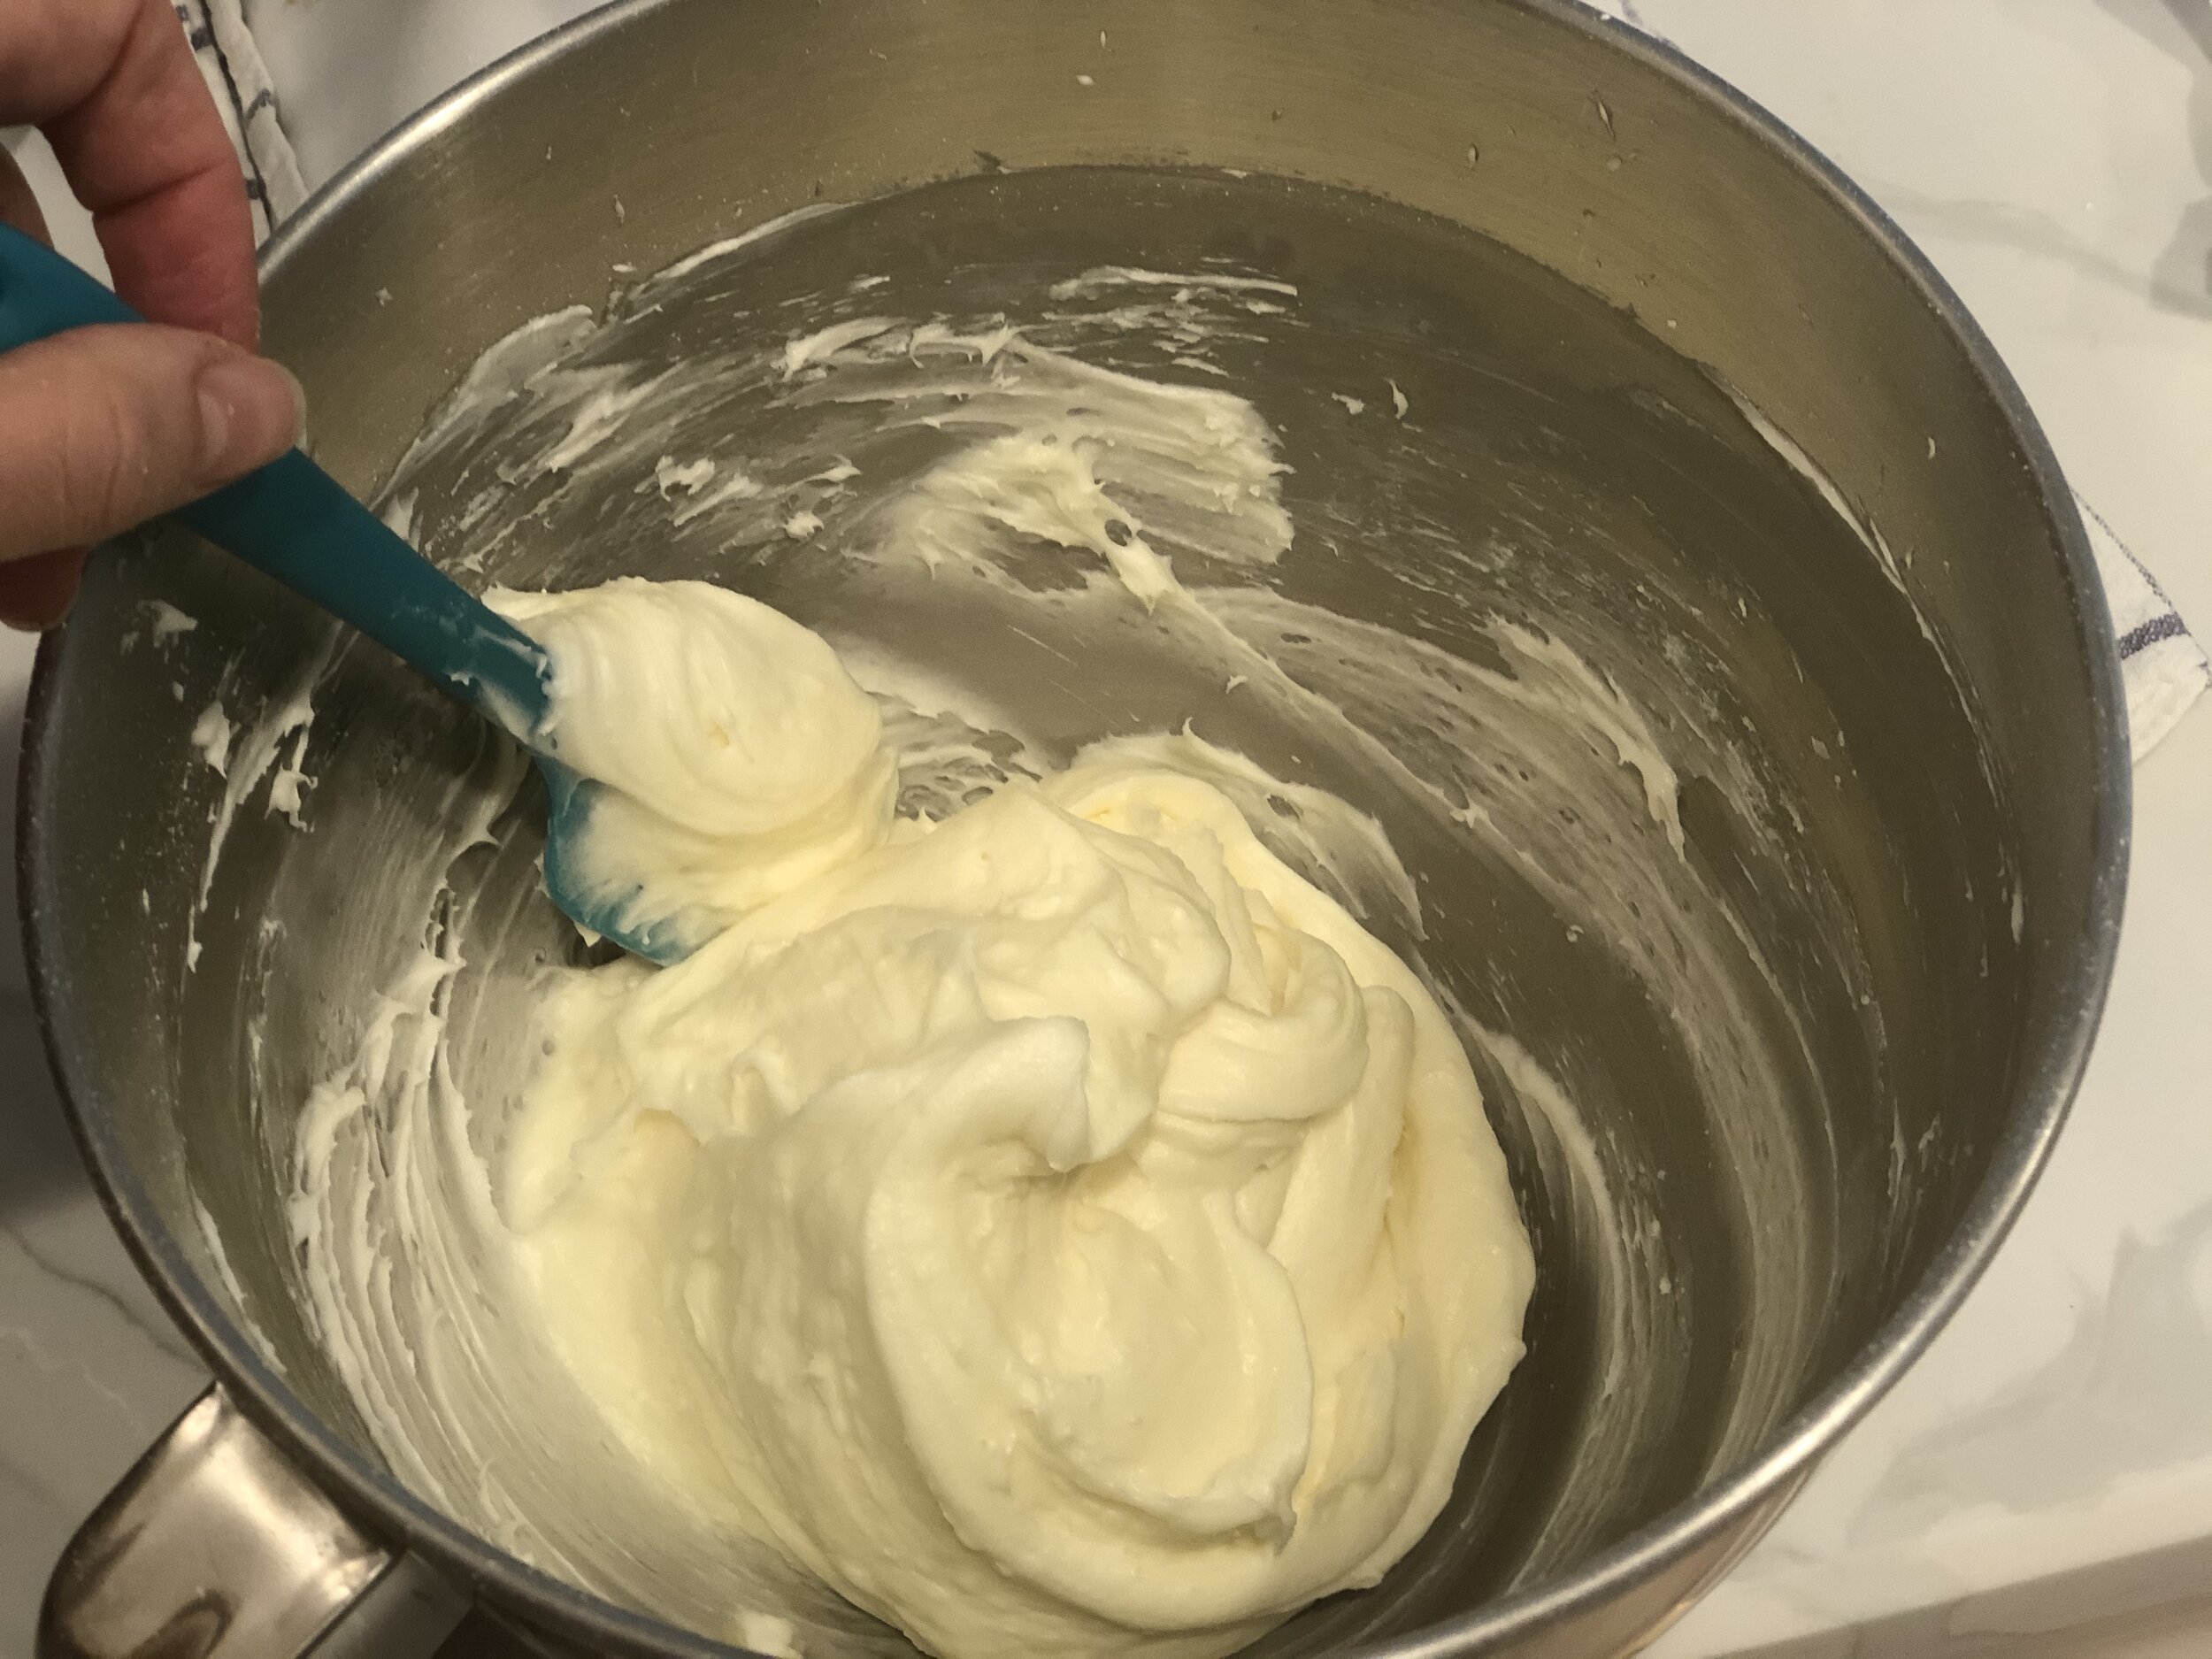  Add vanilla and then mix again until everything is icorporated and smooth. 